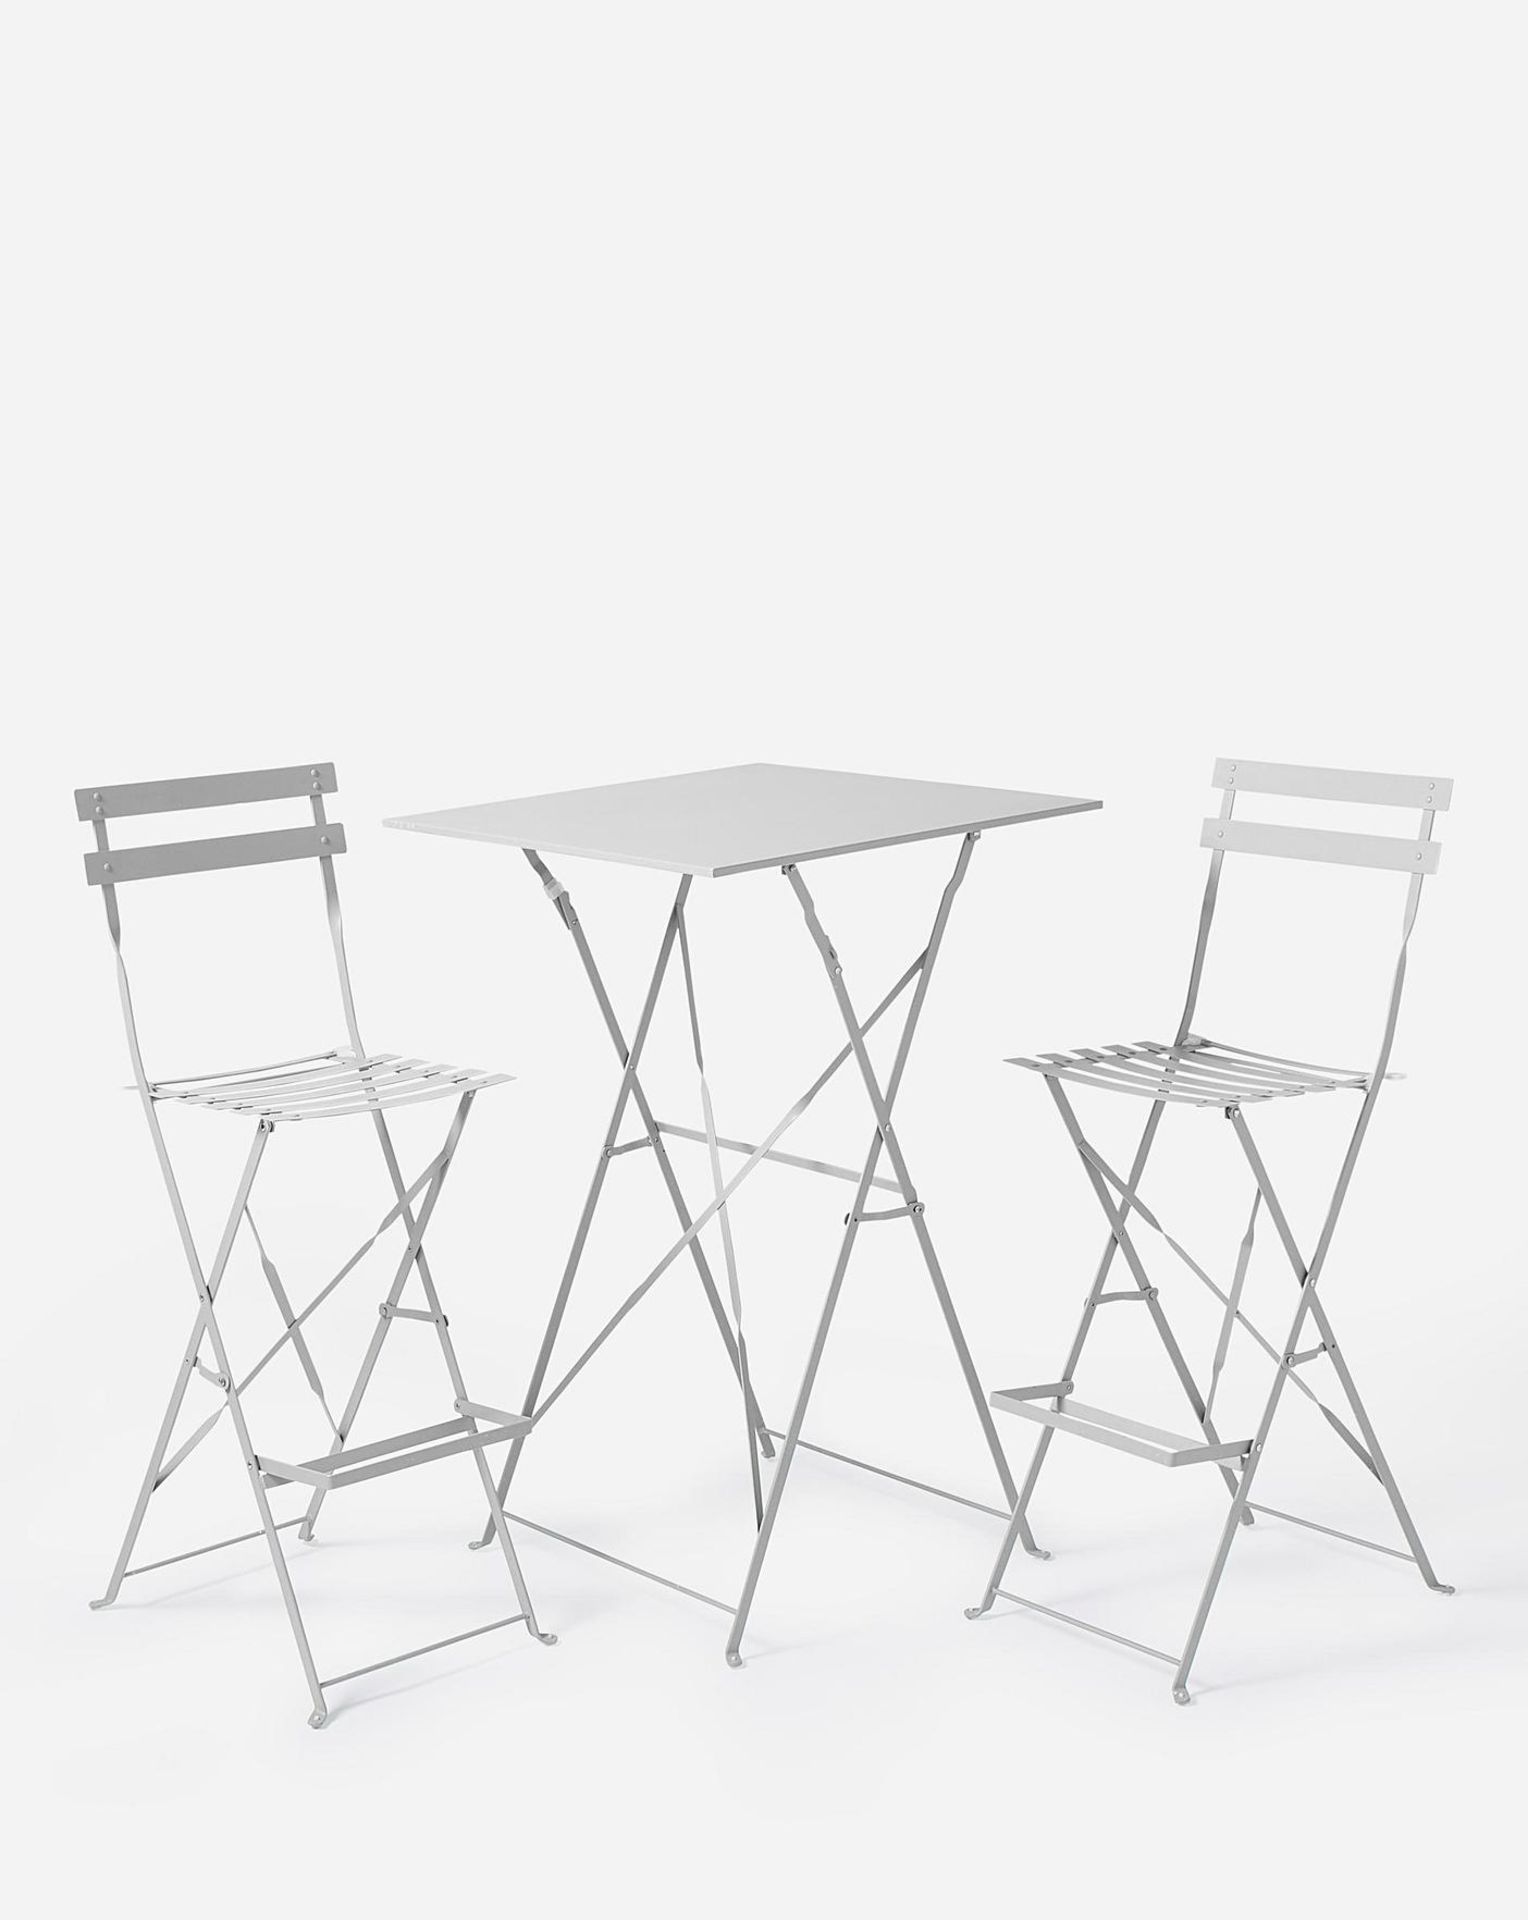 TRADE PALLET TO CONTAIN 6x BRAND NEW Palma Bistro Bar Set GREY. RRP £159 EACH. Liven up your - Image 2 of 2